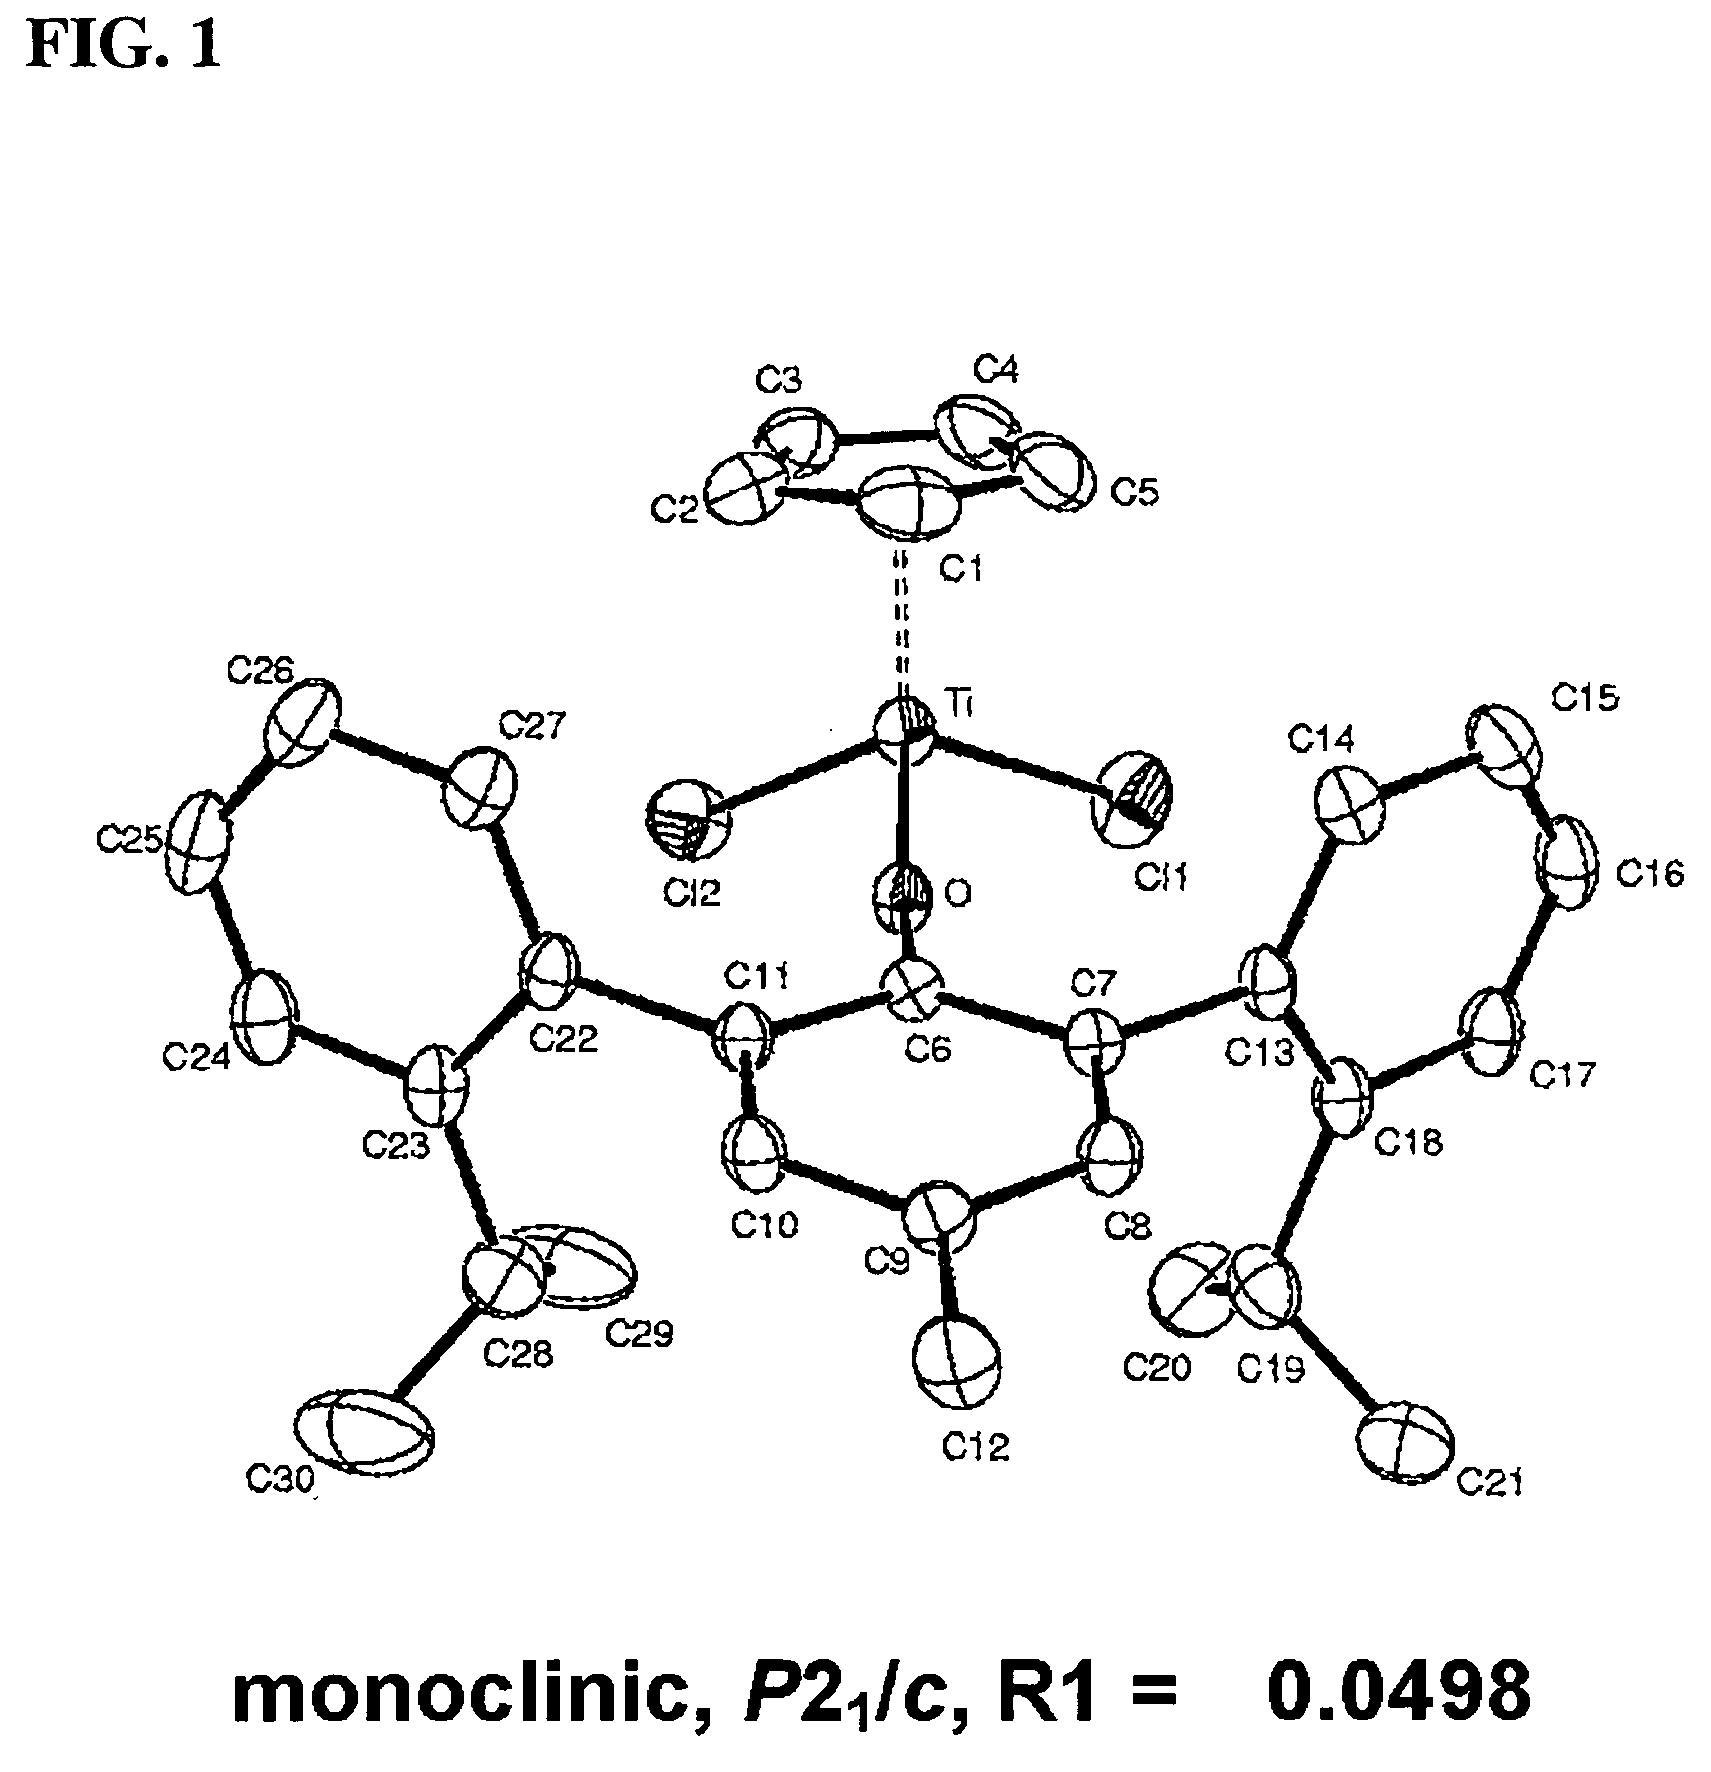 Arylphenoxy catalyst system for producing ethylene homopolymer or copolymers of ethylene and alpha-olefins